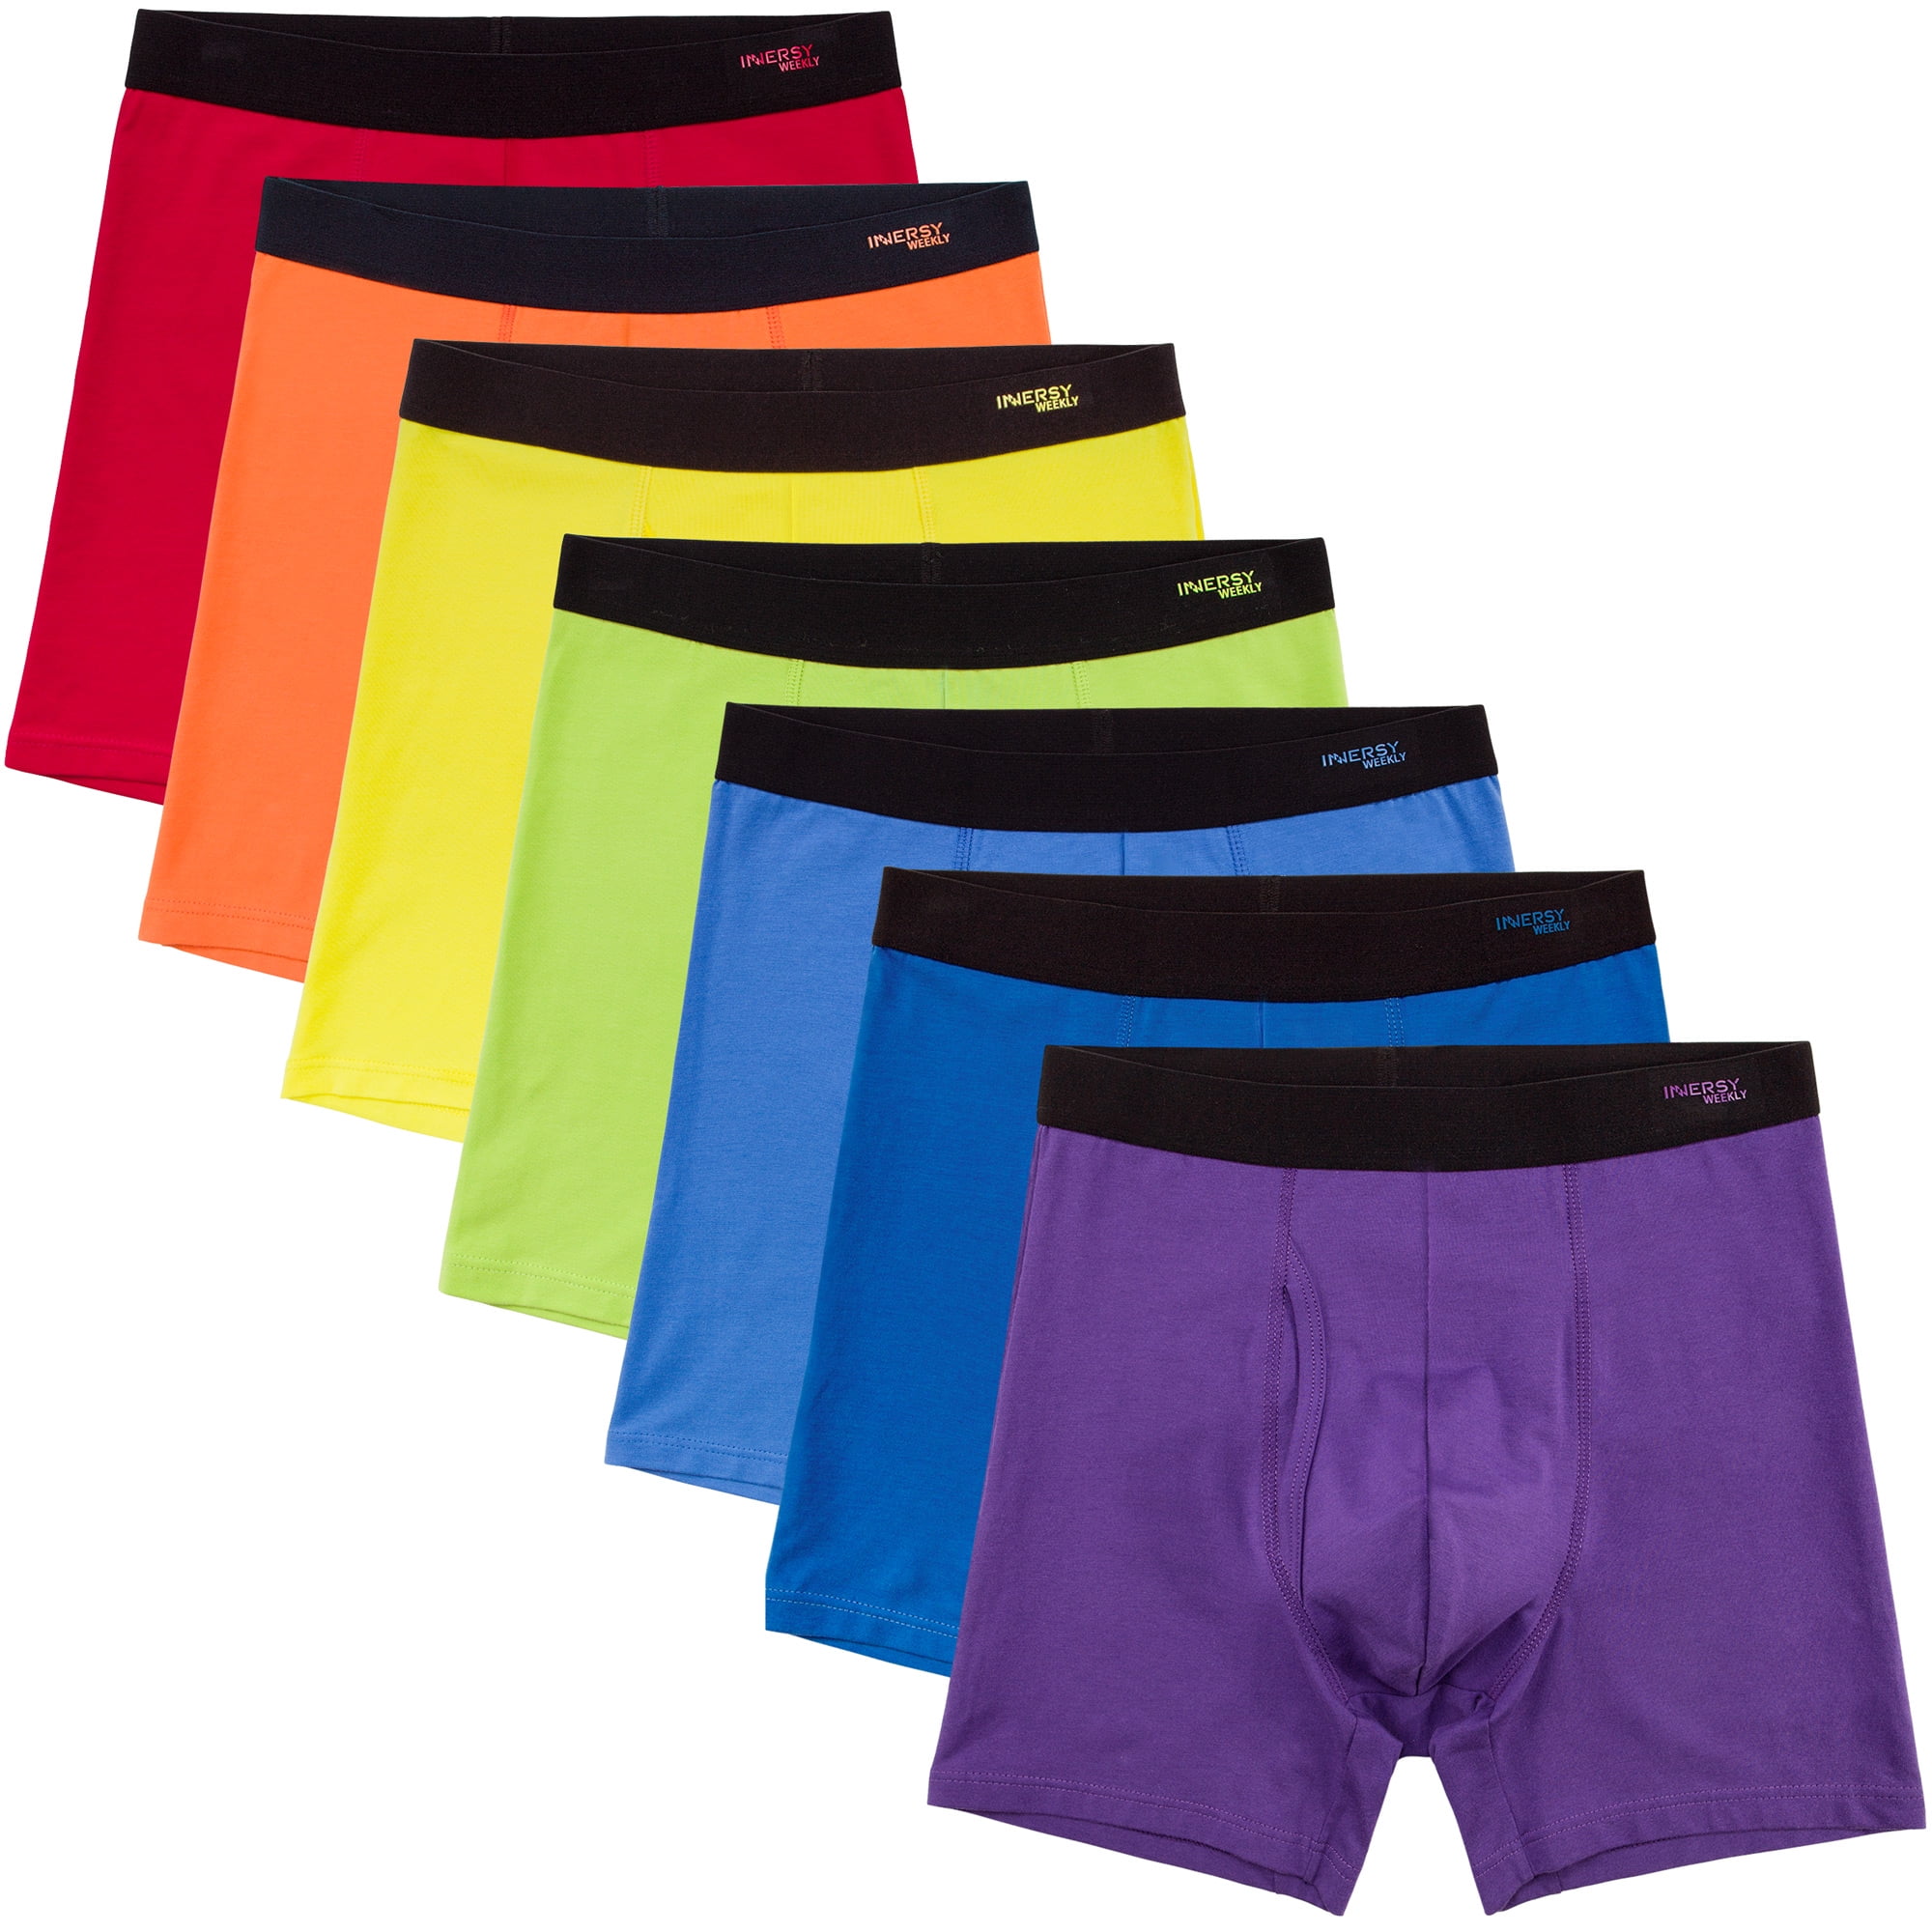 INNERSY Men's Boxer Briefs Cotton Stretchy Underwear 7 Pack for a Week ...